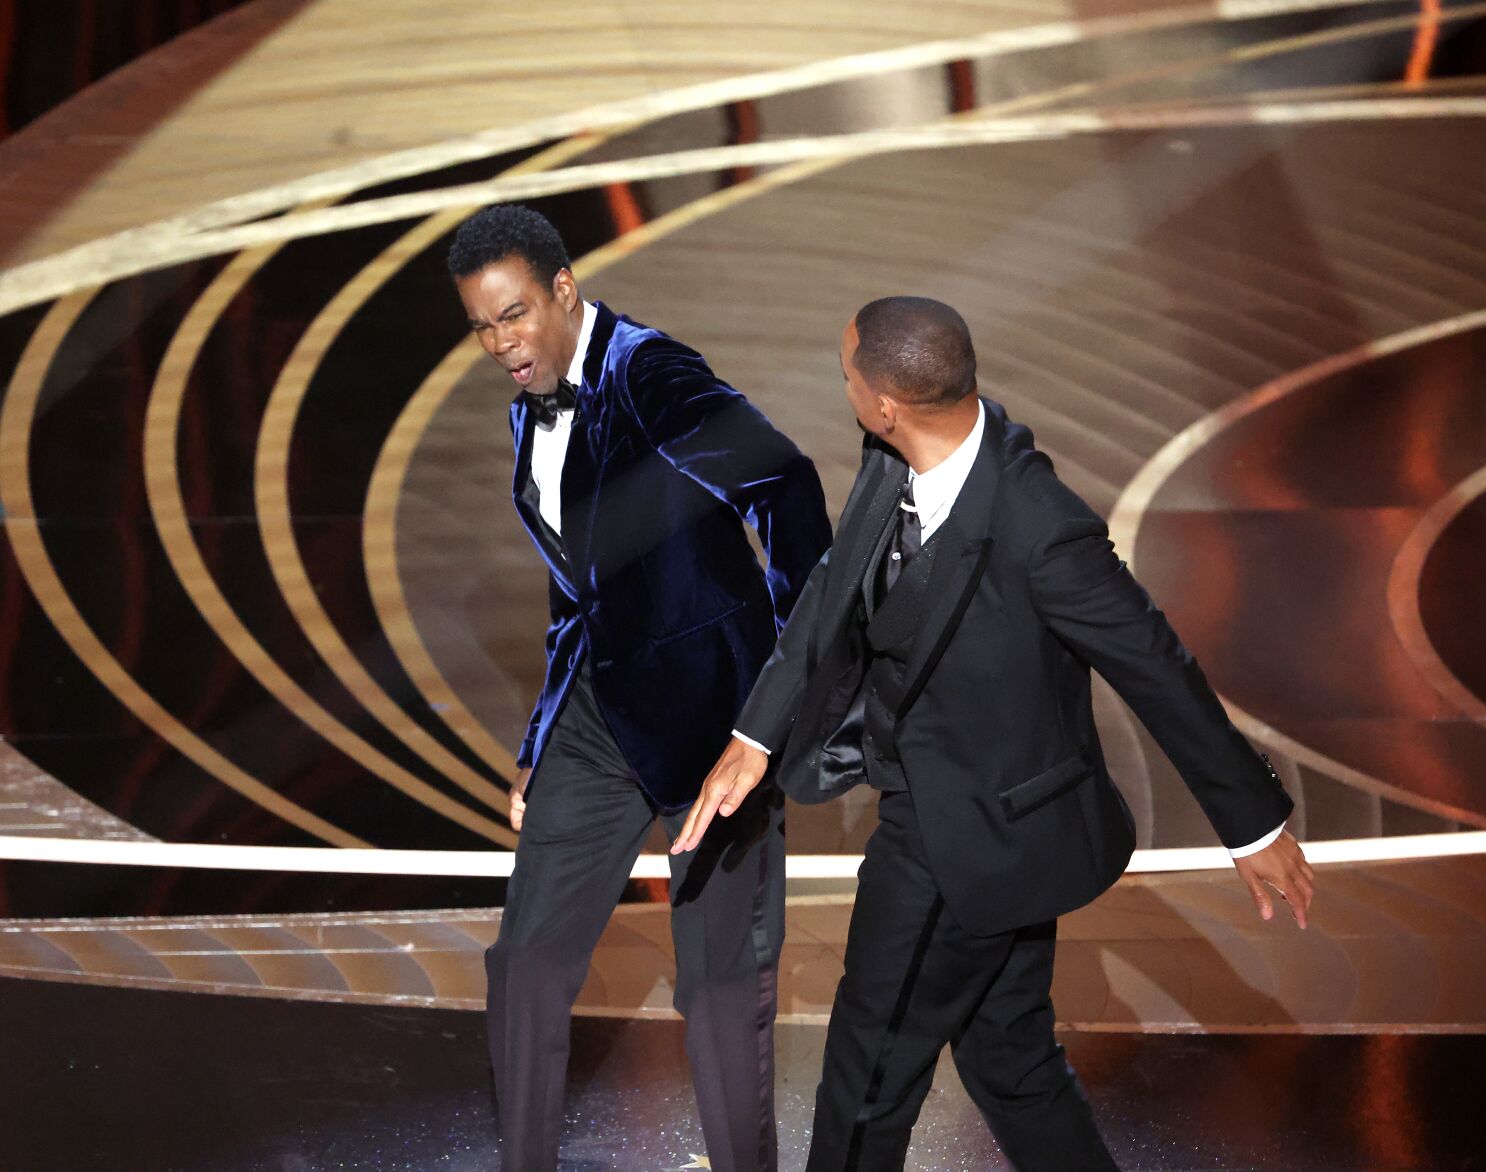 Oscars 2022: How Chris Rock reacted to Will Smith's slap - Los Angeles Times